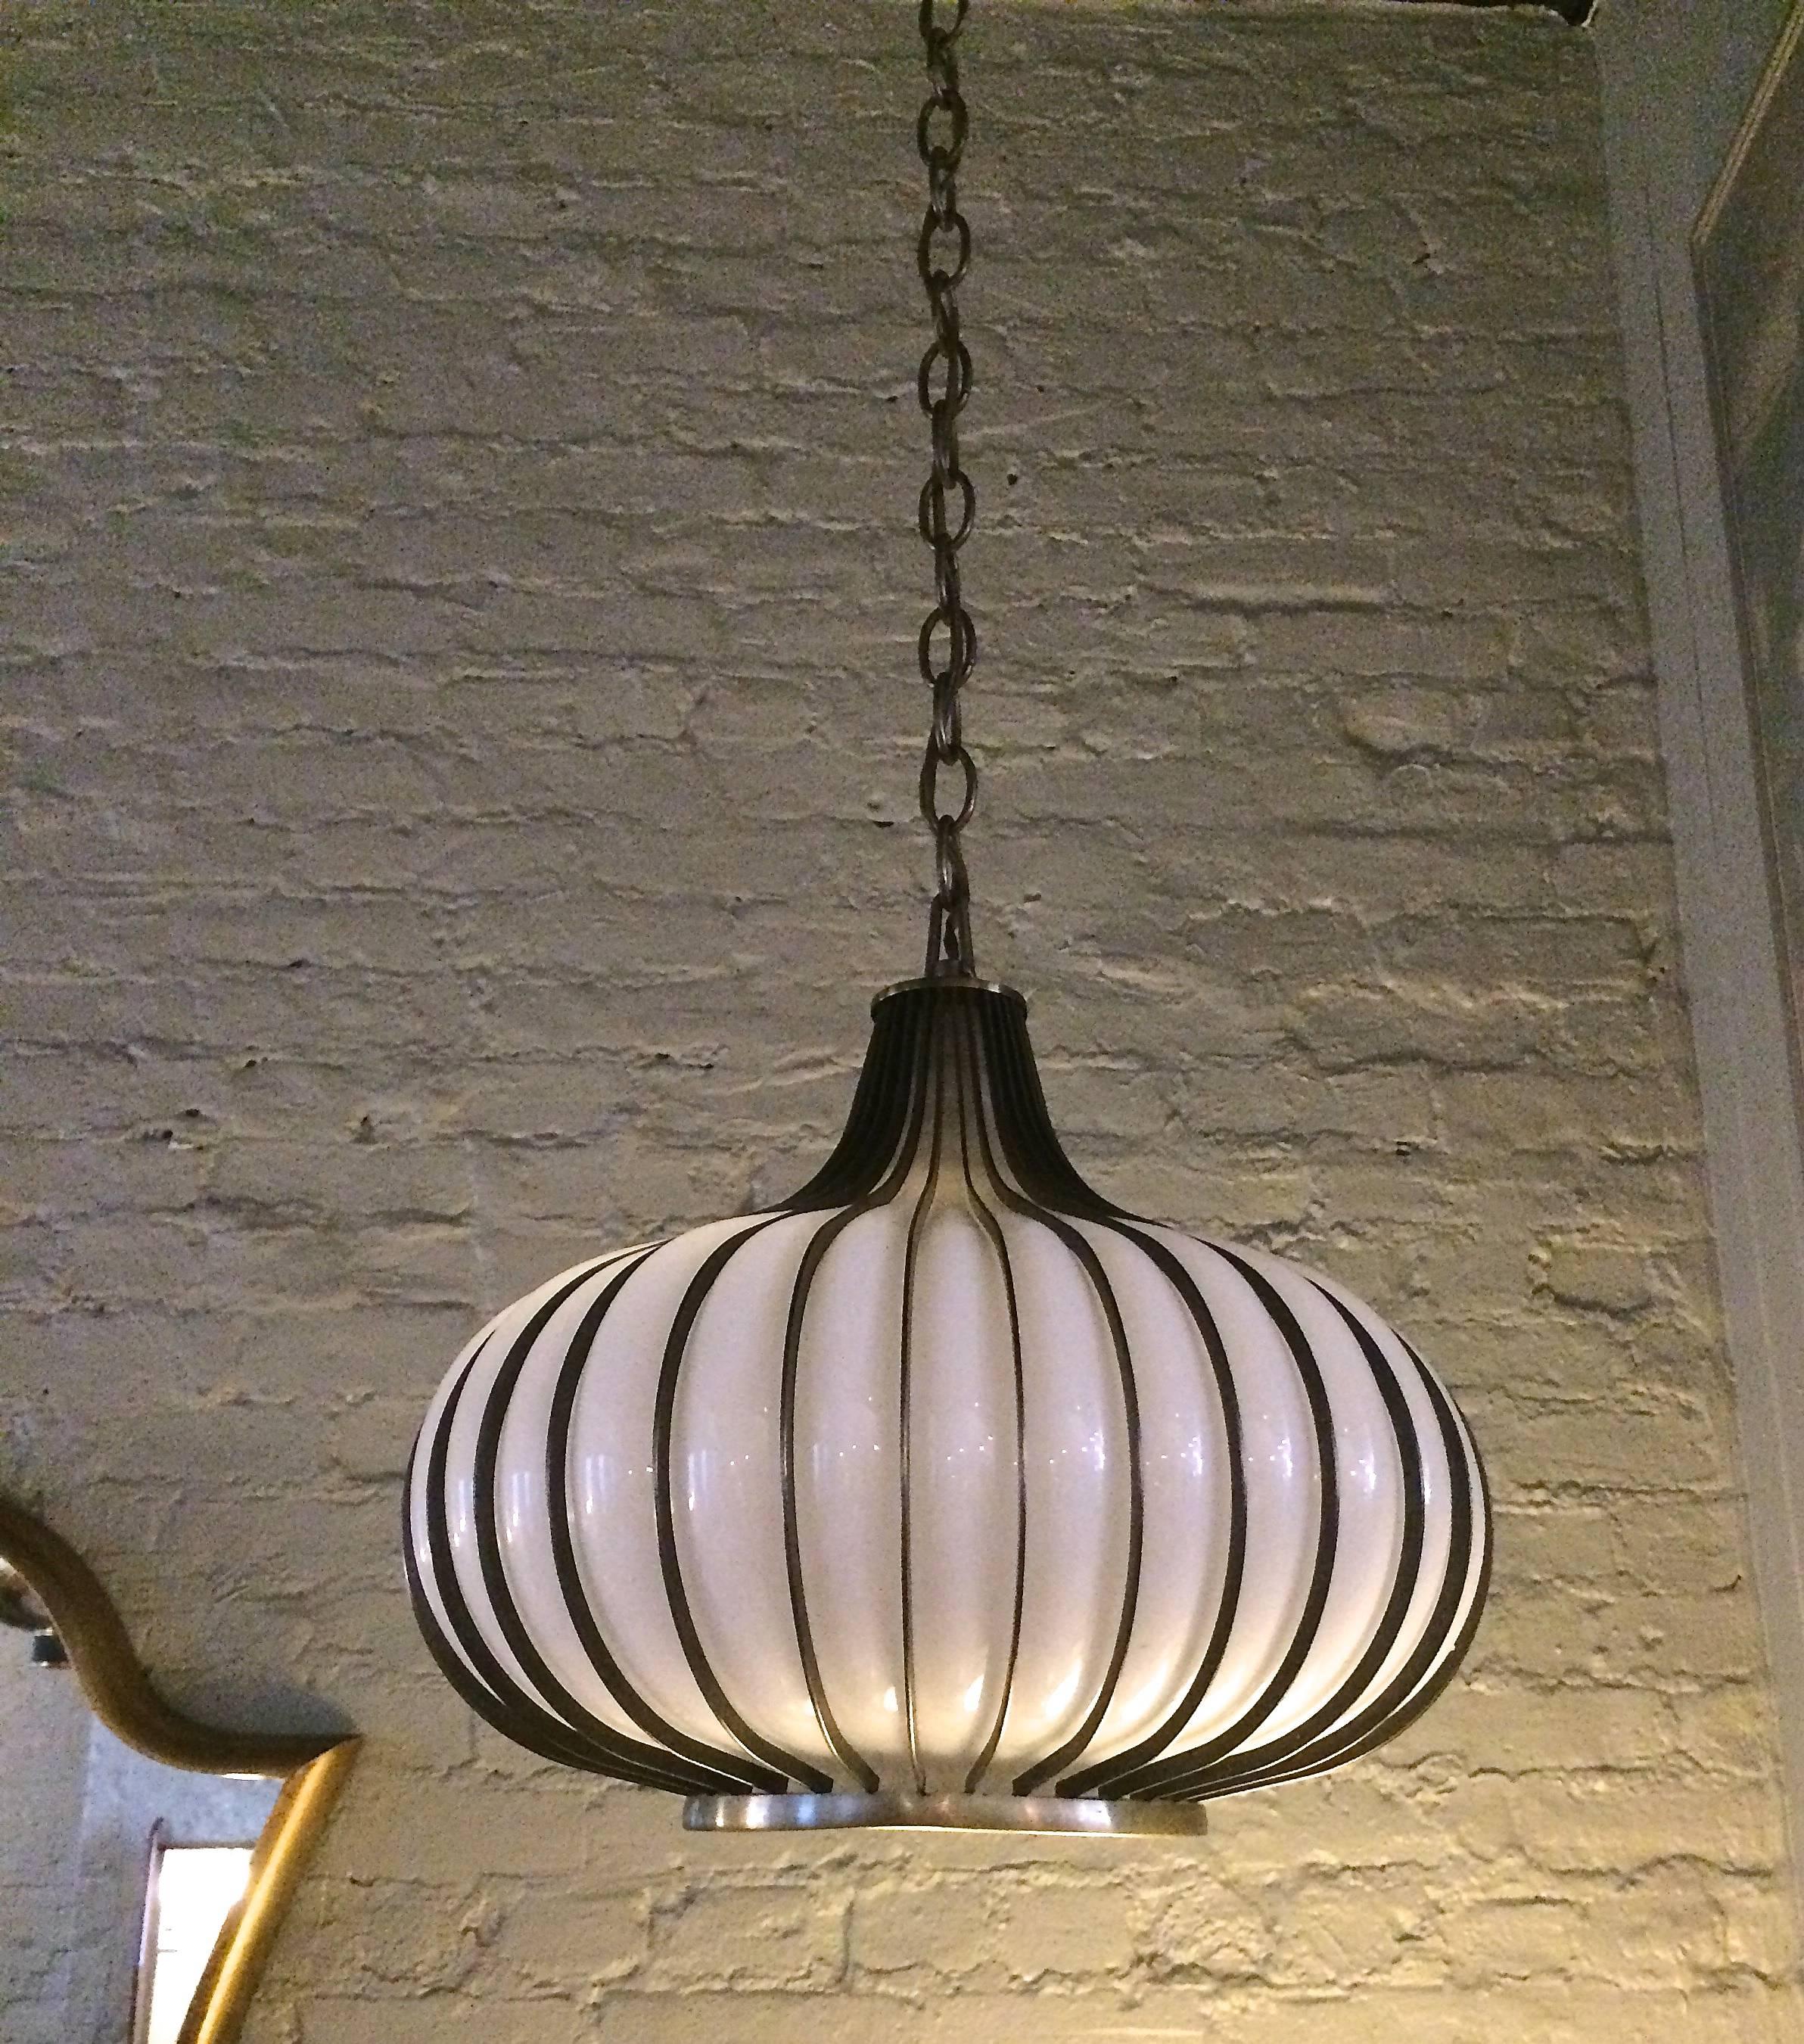 Mid century, Hollywood Regency, garlic-shaped, swag, pendant light with
blown milk glass shade encased in a steel frame.